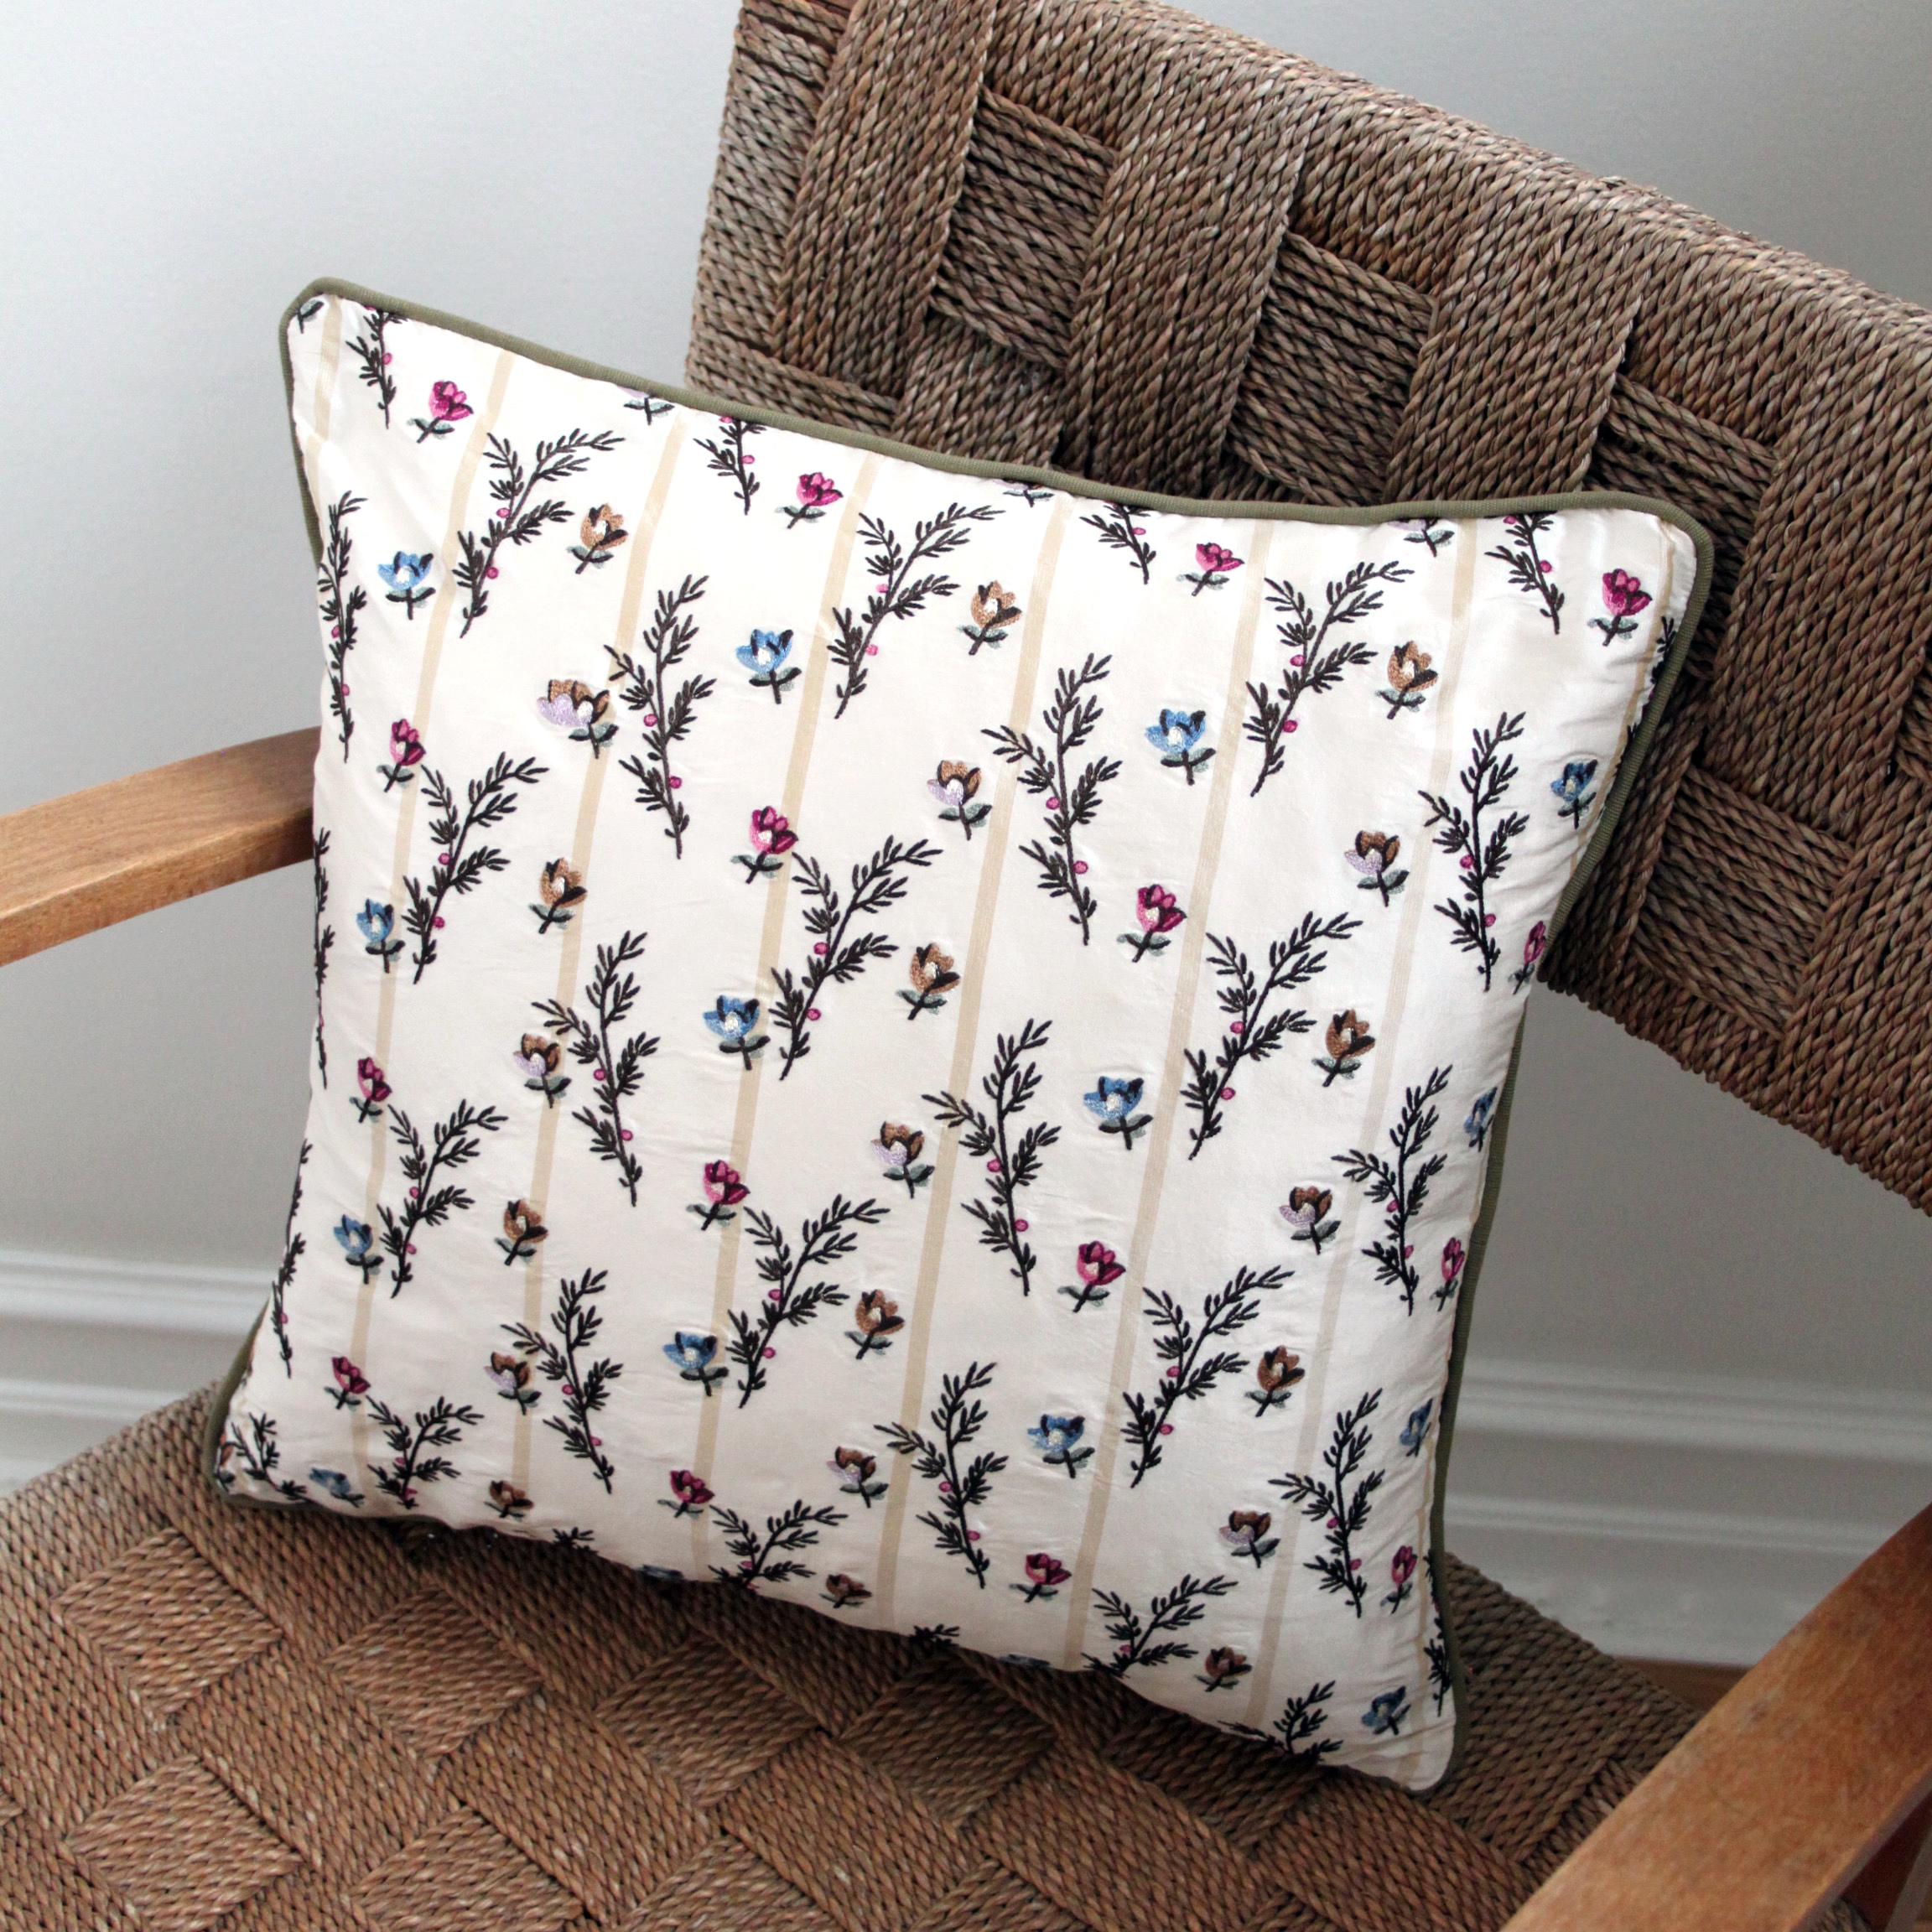 Fabric Special Edition Decorative Pierre Pierre Pillows For Sale